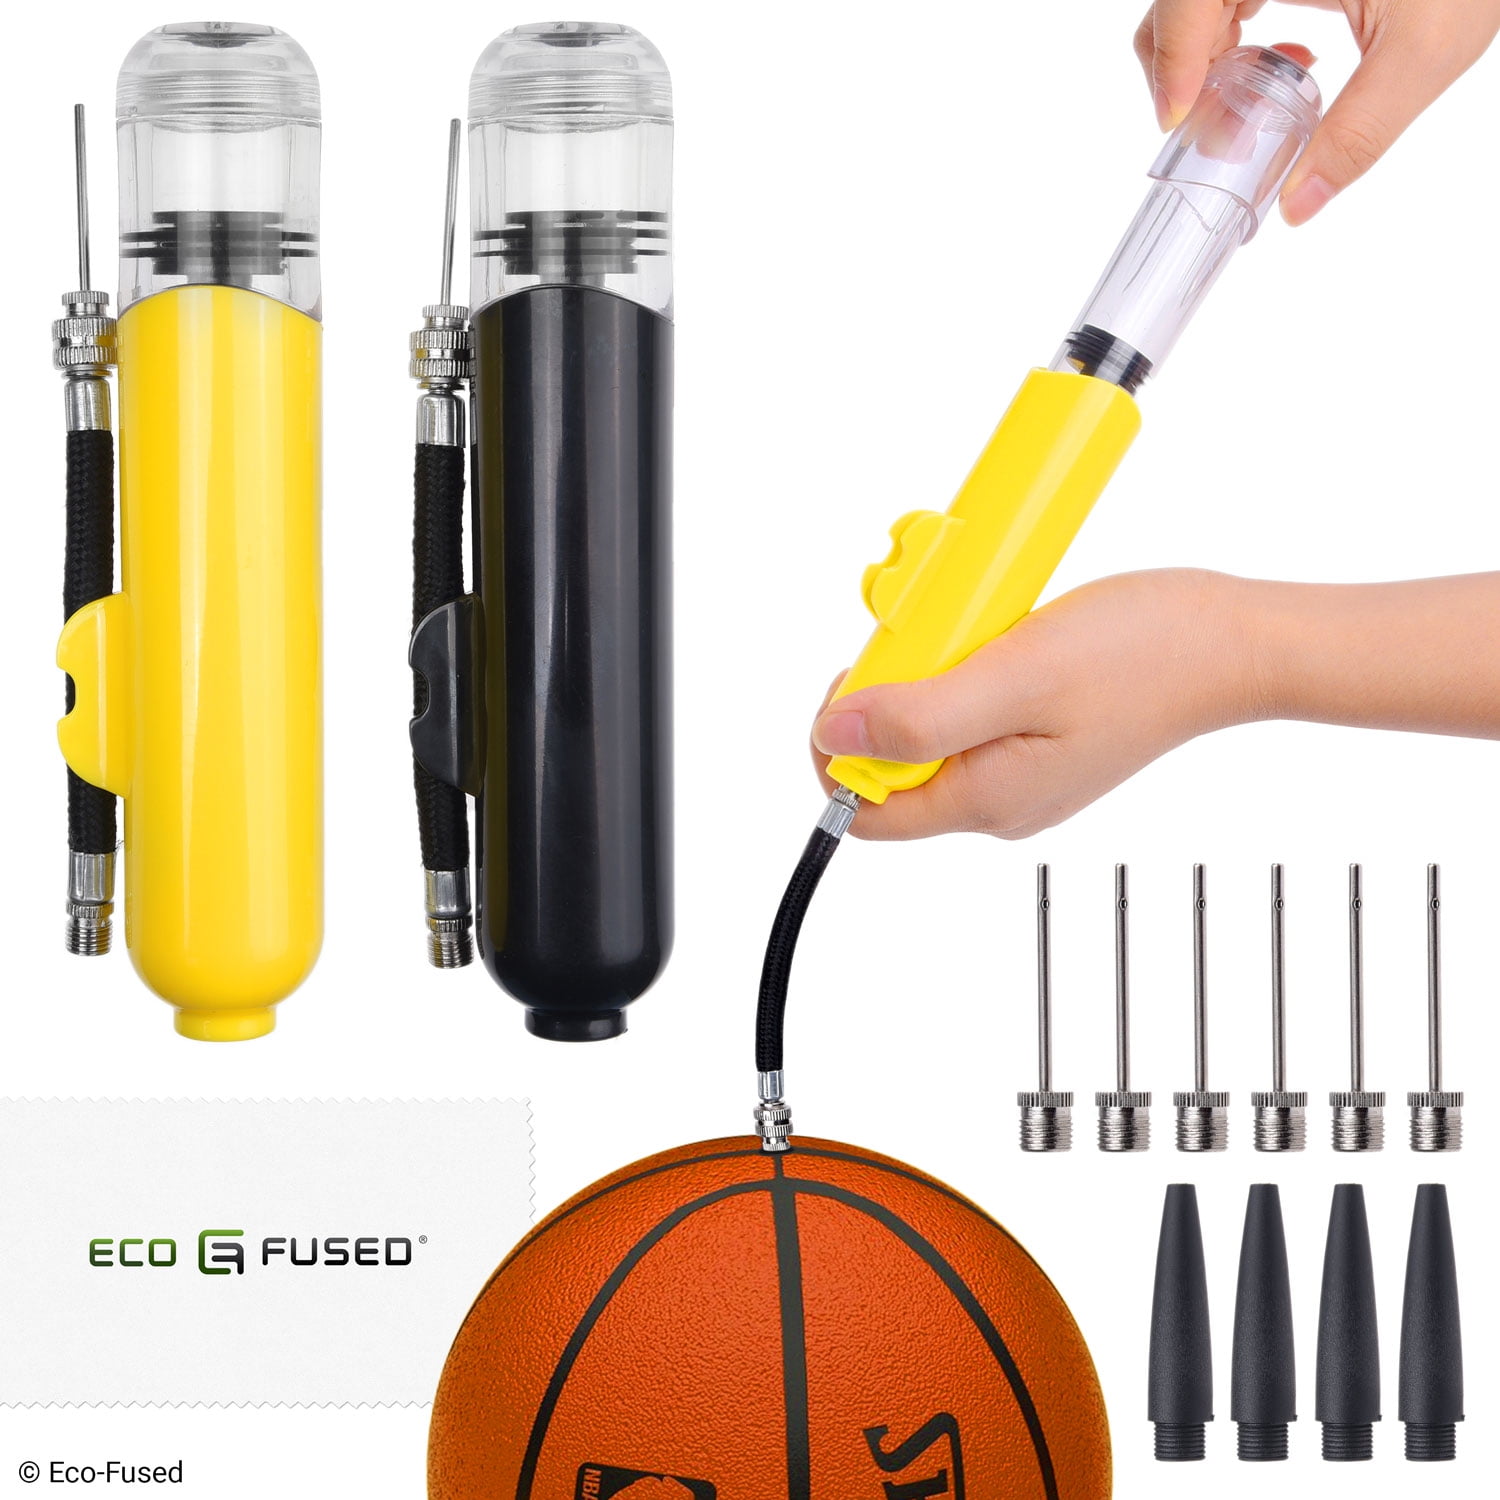 etc Fast Ball Pump Powered by Battery Water Polo Basketball Volleyball Rugby Zacro Automatic Electric Ball Pump with 7 Needles Football Handball Hand held Pump to Fast inflate Soccer